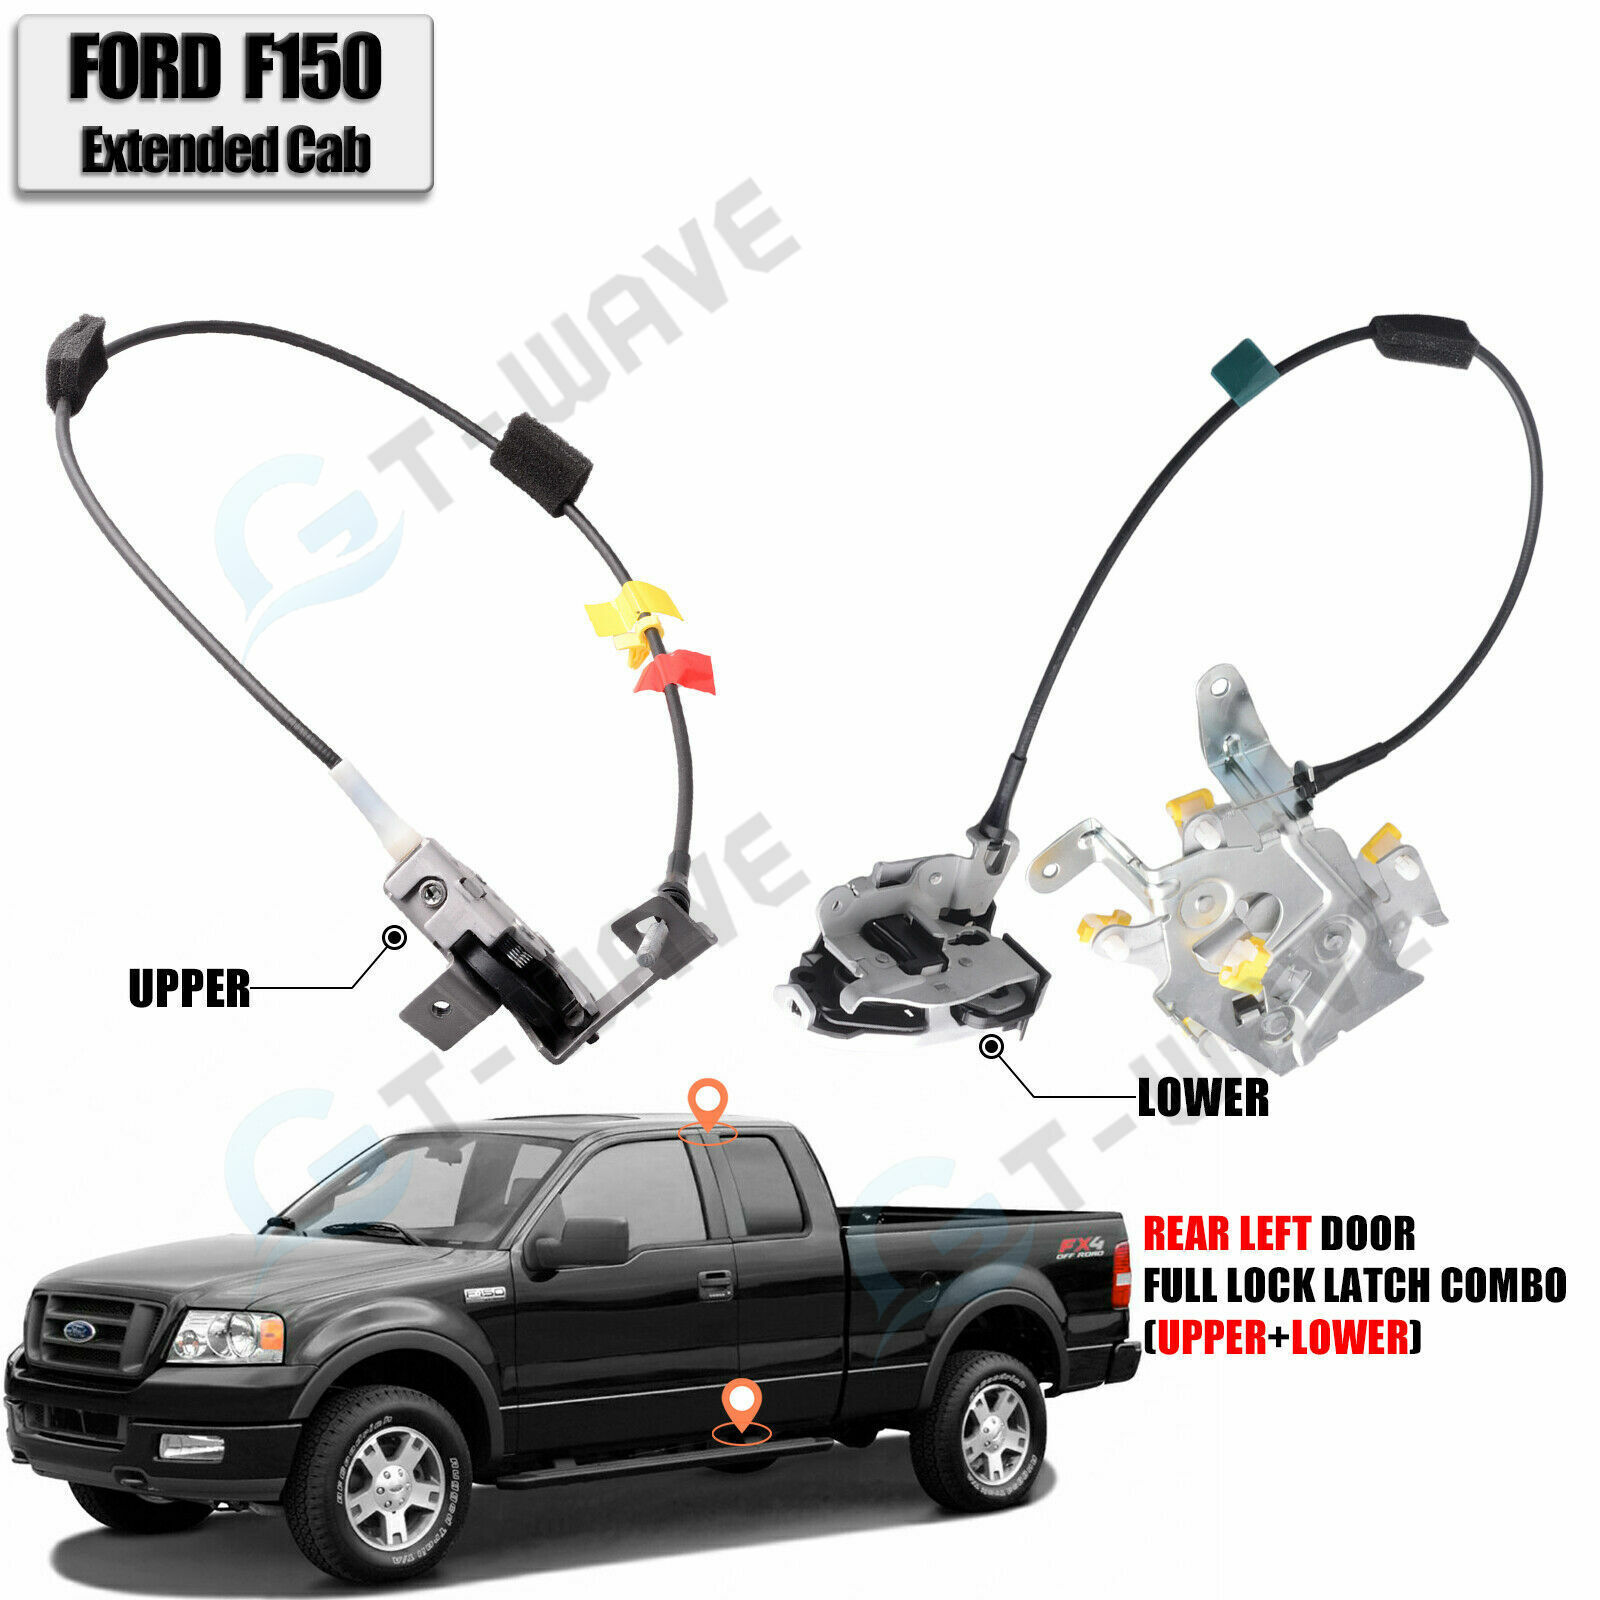 Rear Left Lower&Upper Door Lock Latch Assembly fit 97-03 Ford F150 Extended Cab